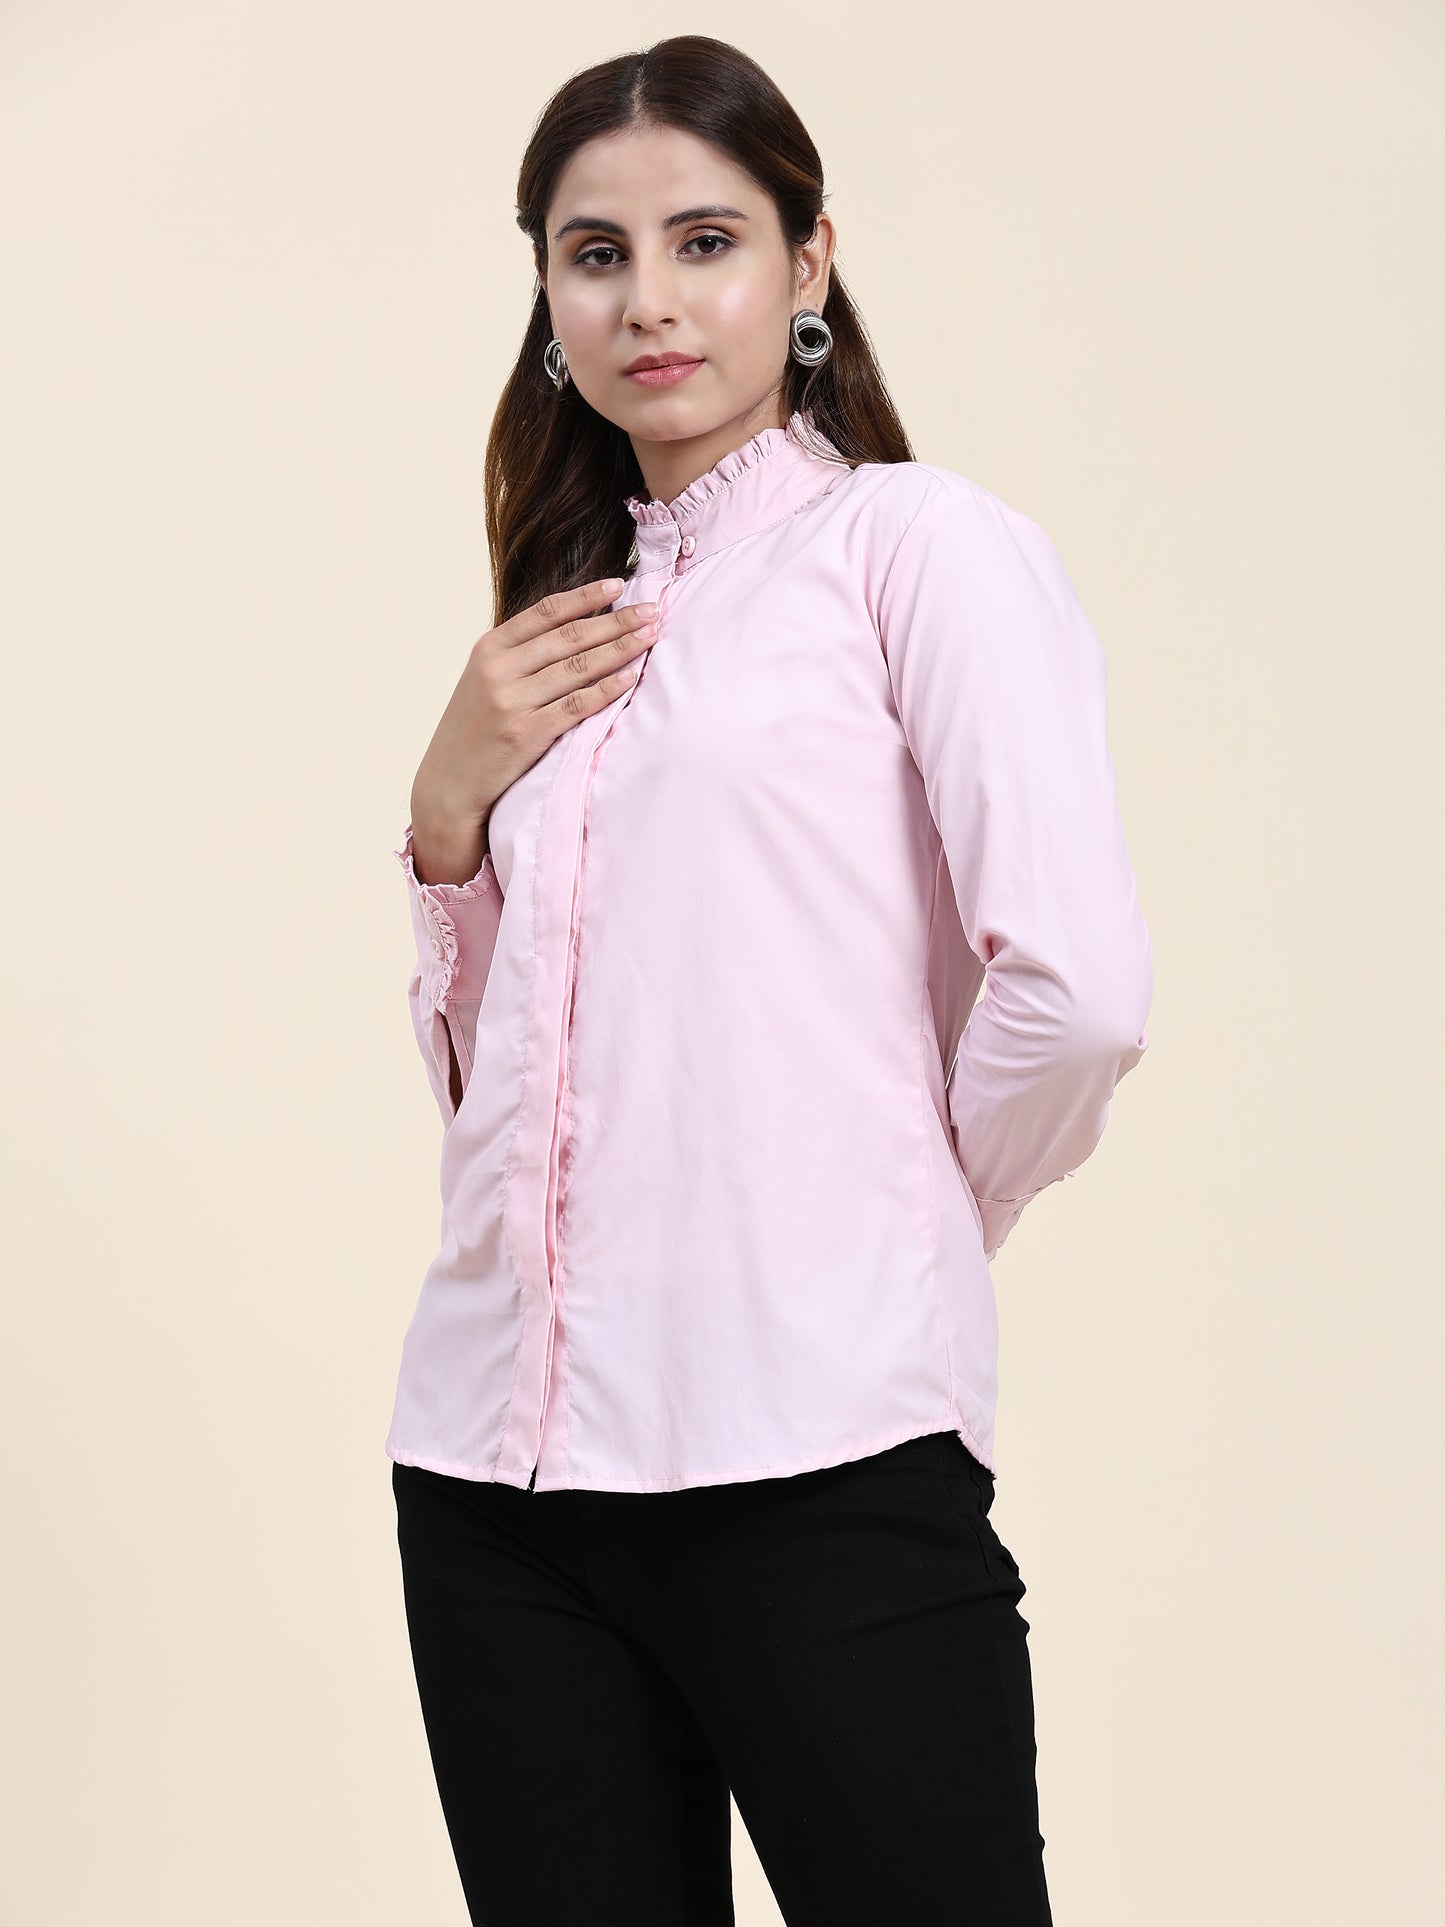 ANUSHIL Women's Cotton Shirts : Comfortable and Fashionable with Gathered Neck and Sleeves, Pink